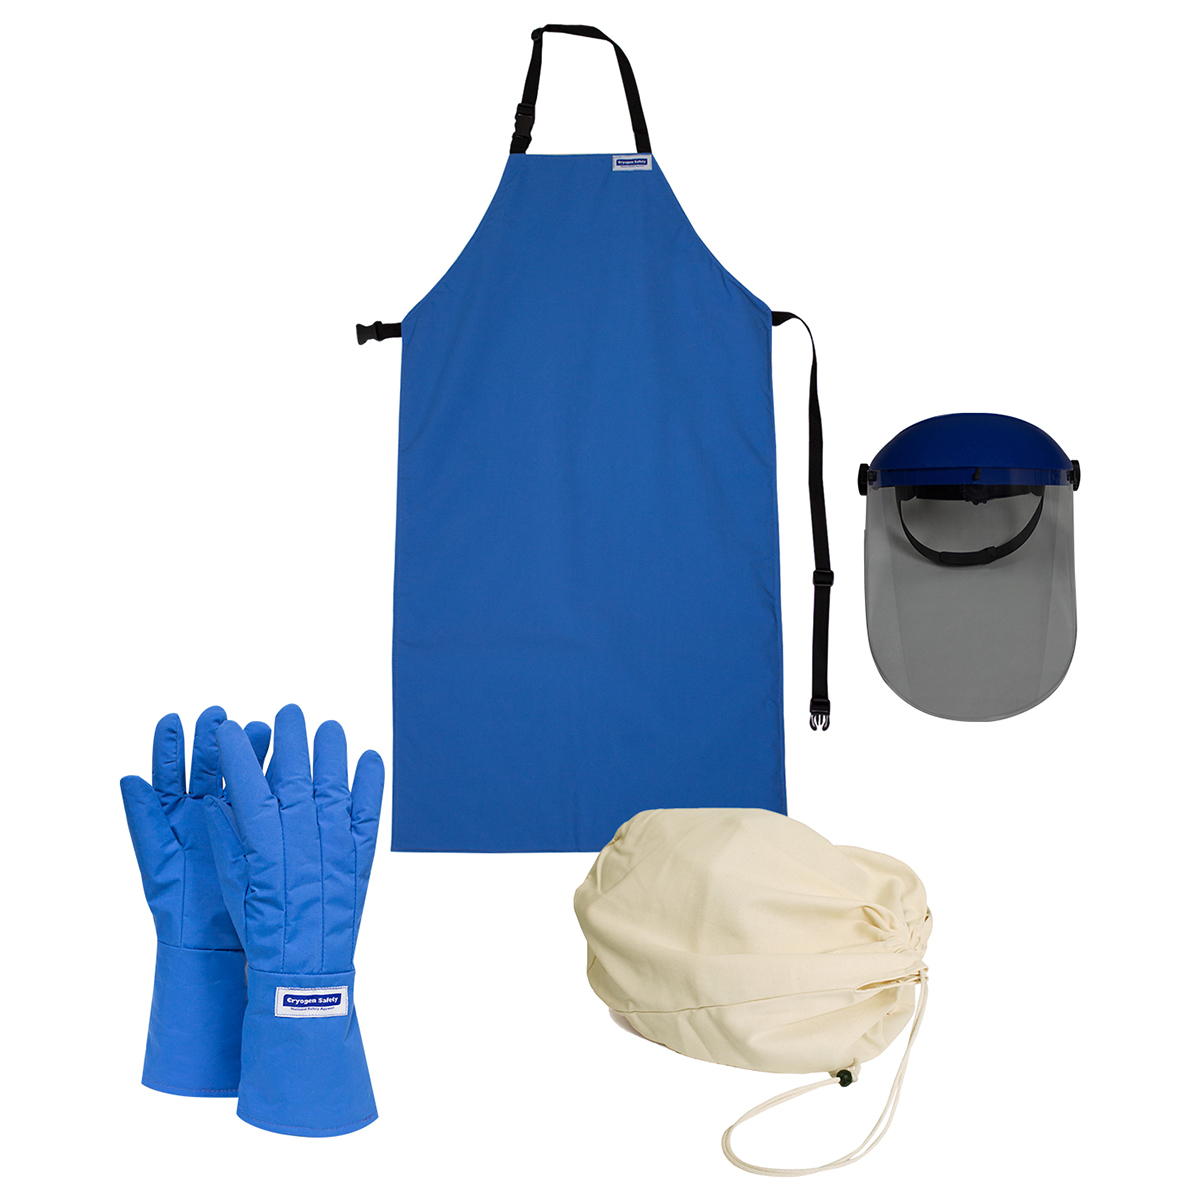 National Safety Apparel® Large Thinsulate™ Lined Teflon™ Laminated Nylon Mid-Arm Length Waterproof Cryogen Glove Kit